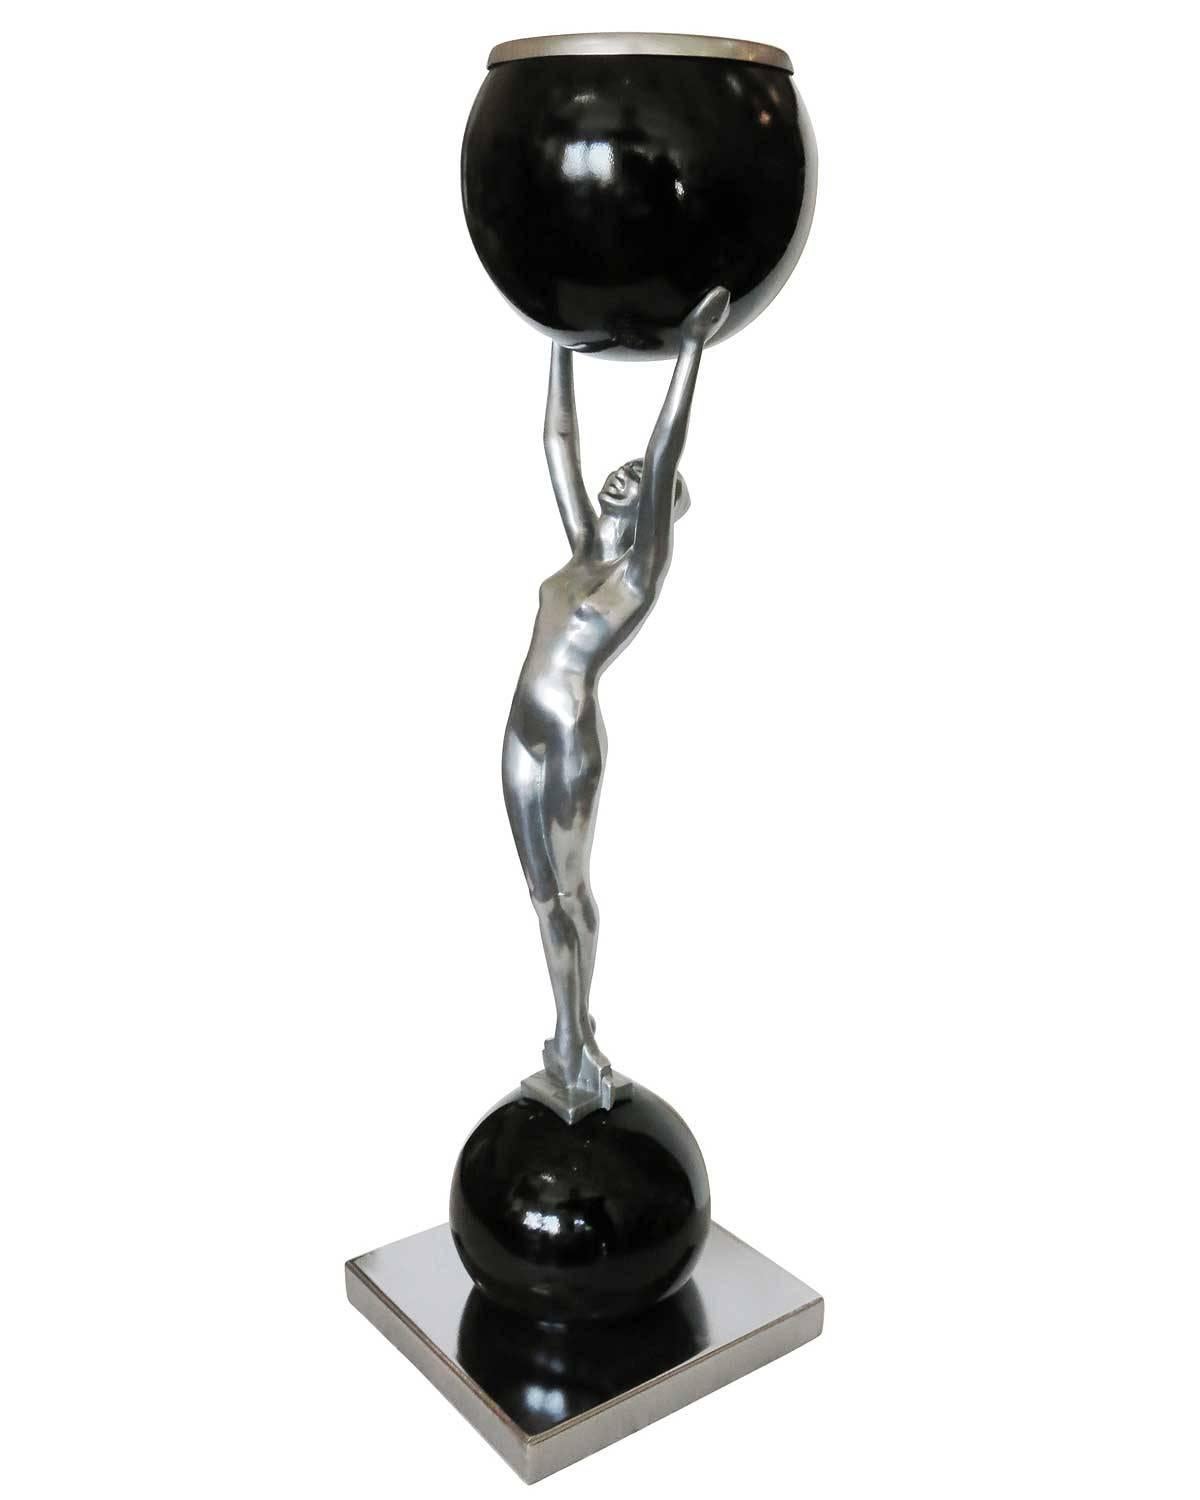 Frankart-style table lamp featuring a nude female figure standing on top of a chrome ball holding a black onyx ball that contains a light. 

Available two.